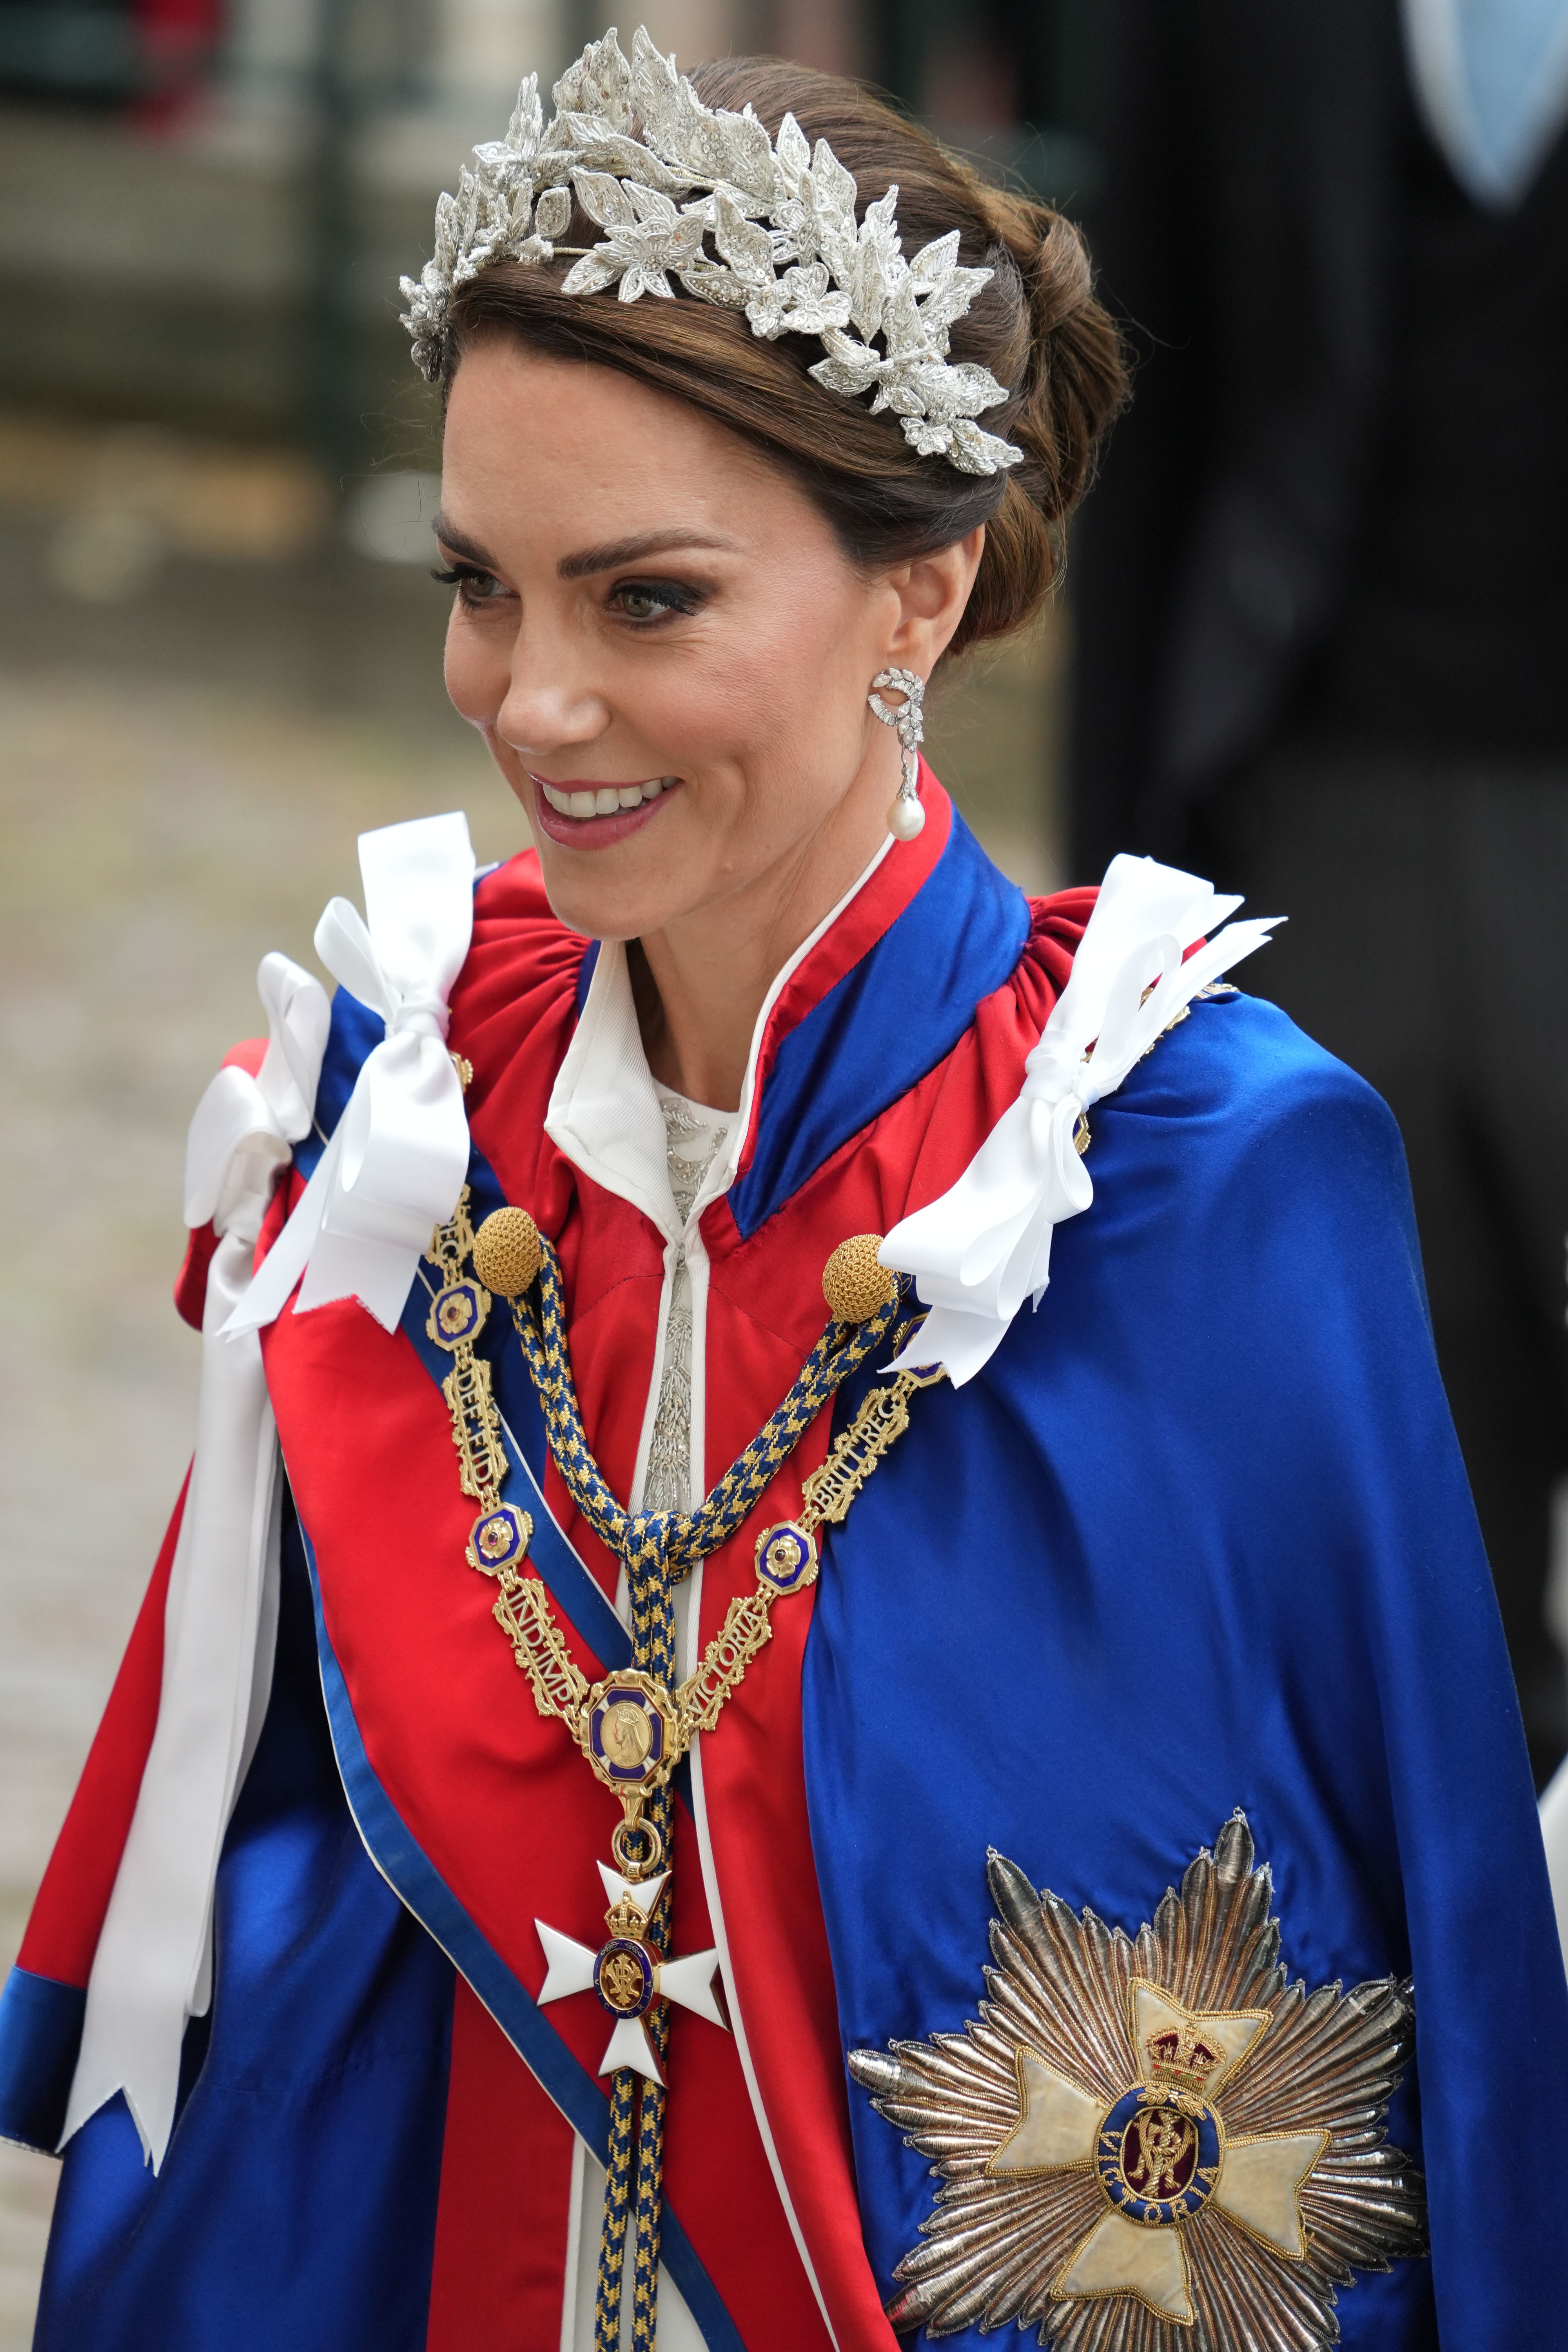 Kate in ceremonial attire with sash and tiara